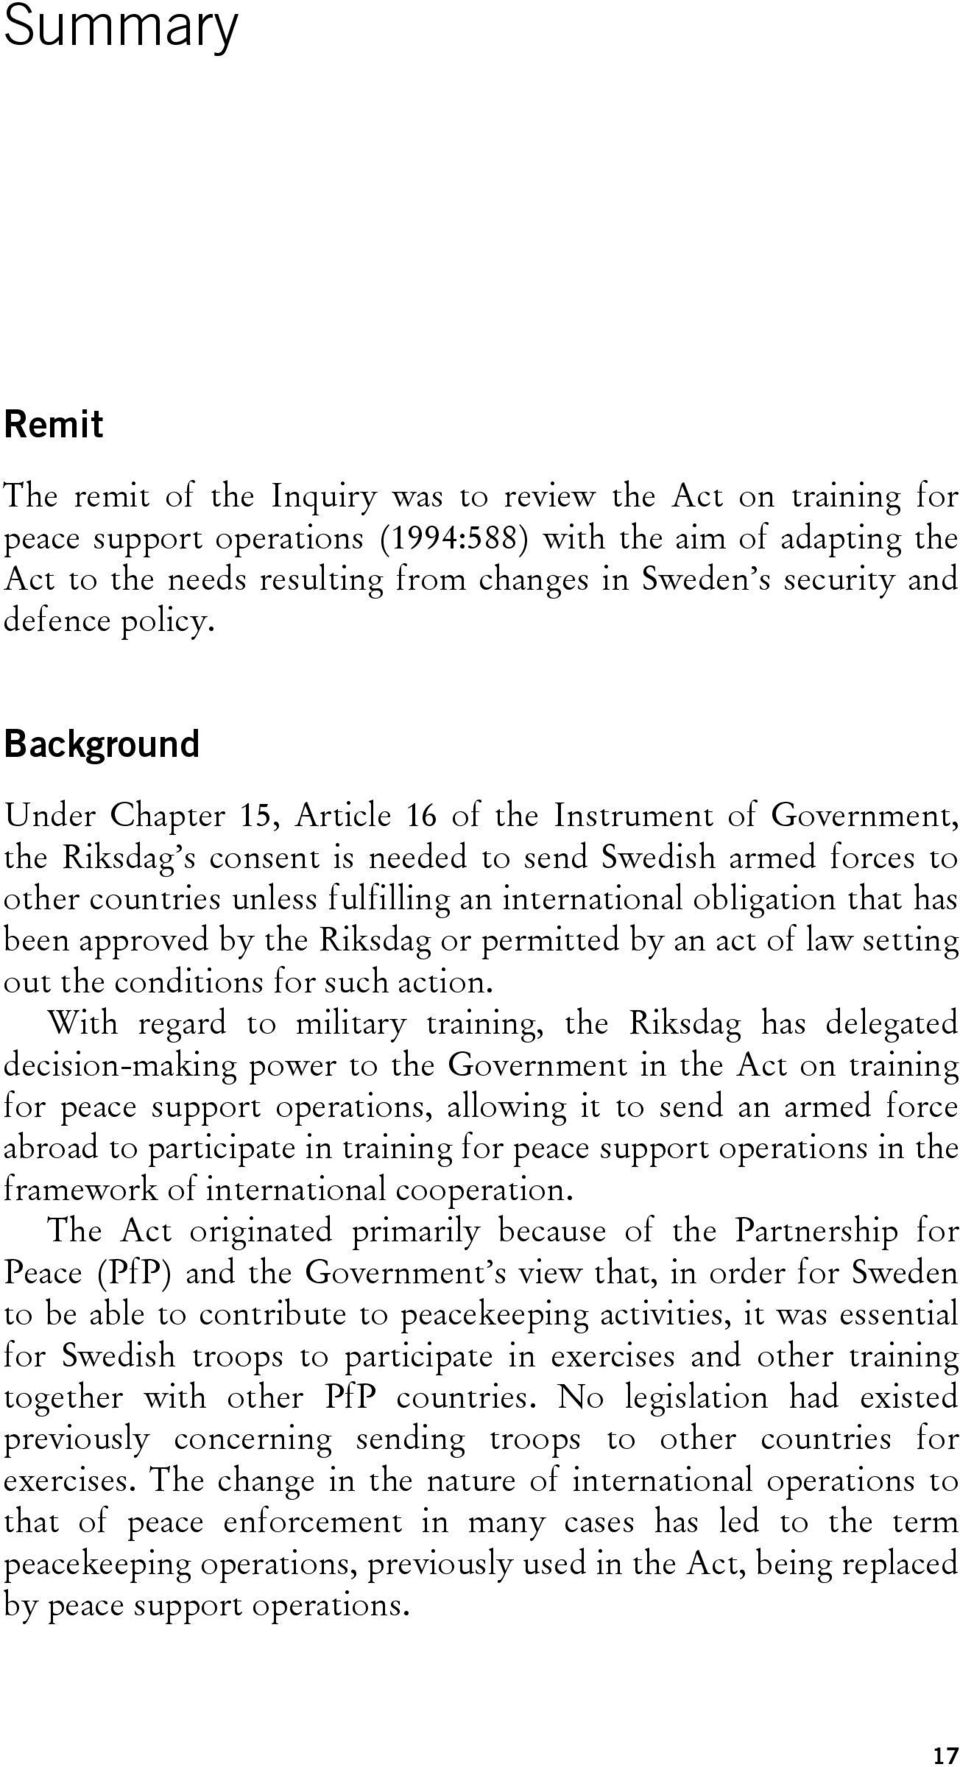 Background Under Chapter 15, Article 16 of the Instrument of Government, the Riksdag s consent is needed to send Swedish armed forces to other countries unless fulfilling an international obligation